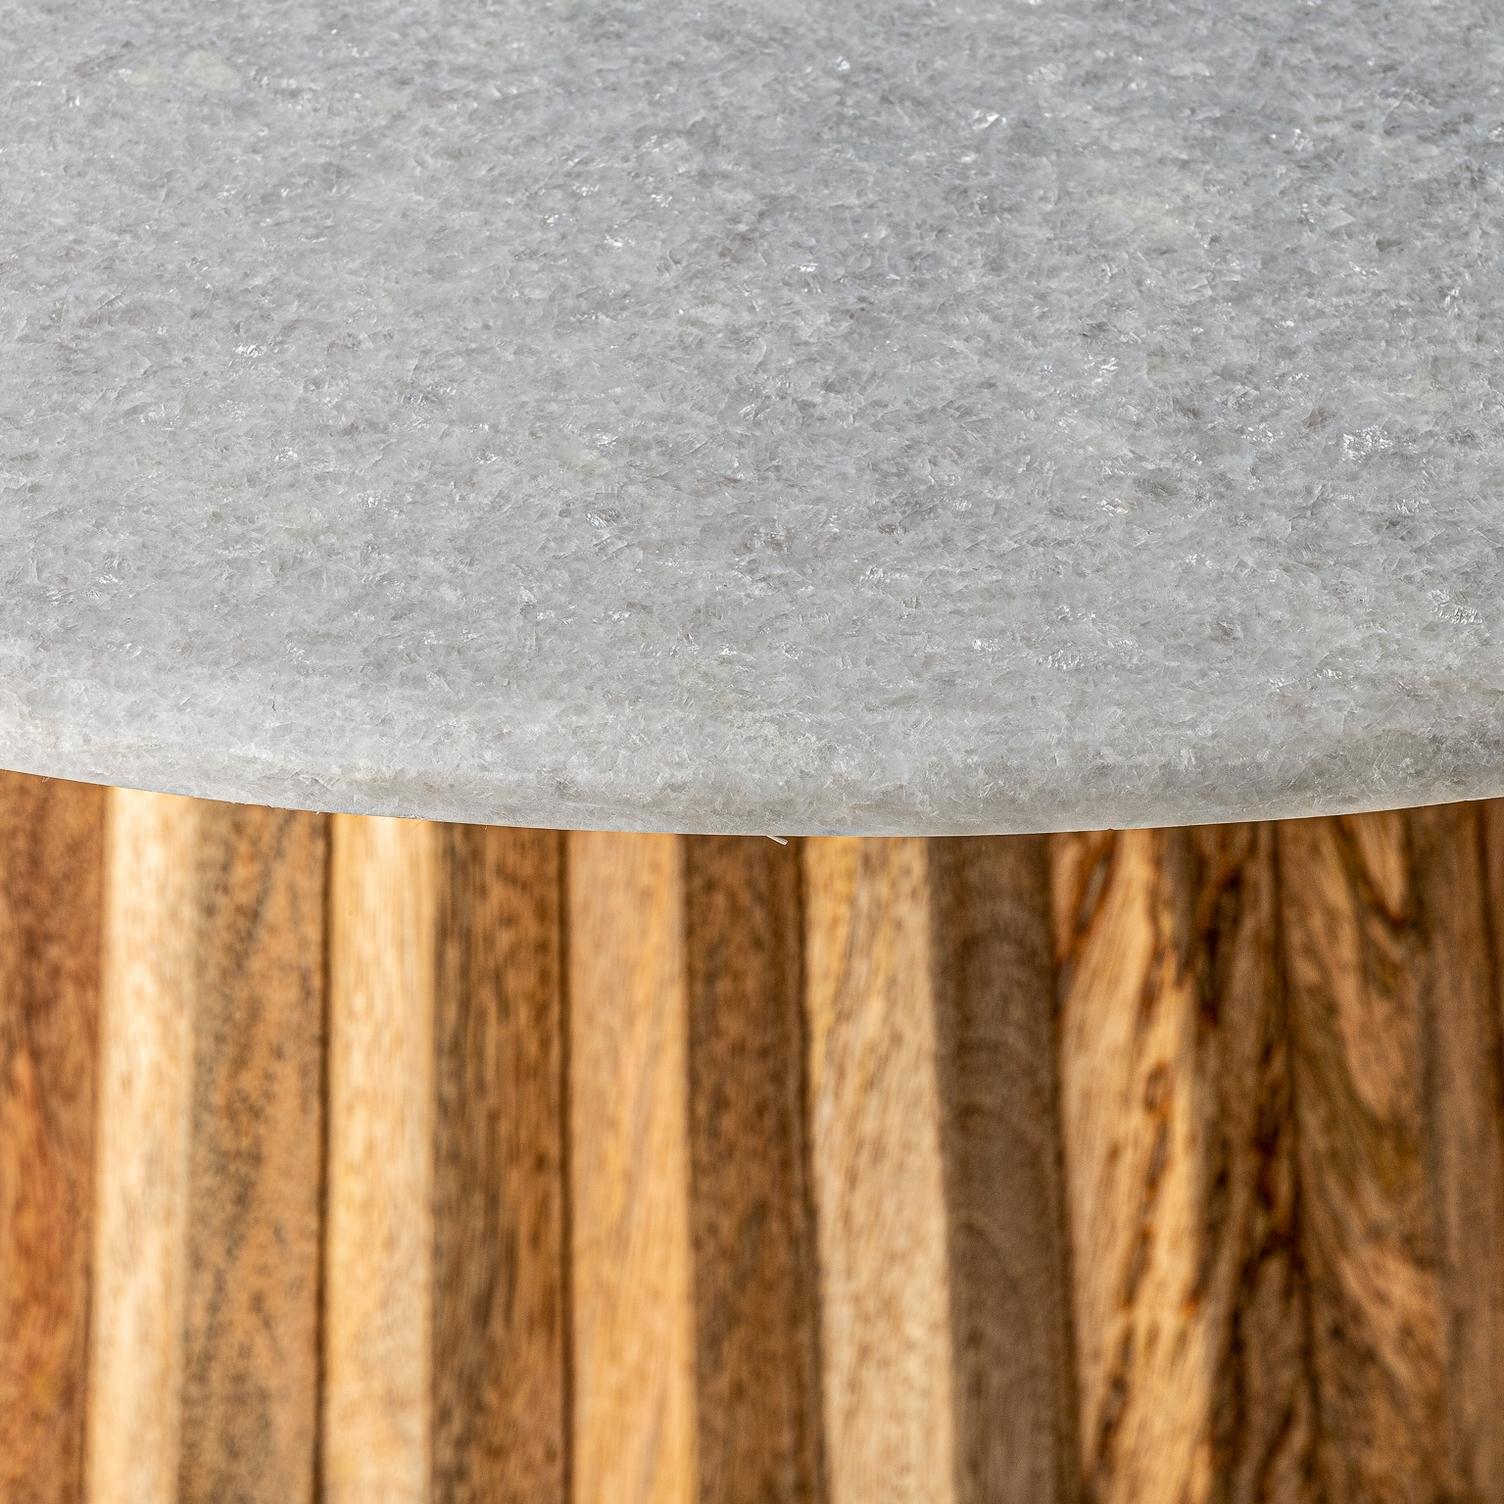 Italian design style round pedestal table consisting of a graphic wooden base with a round white marble tray.